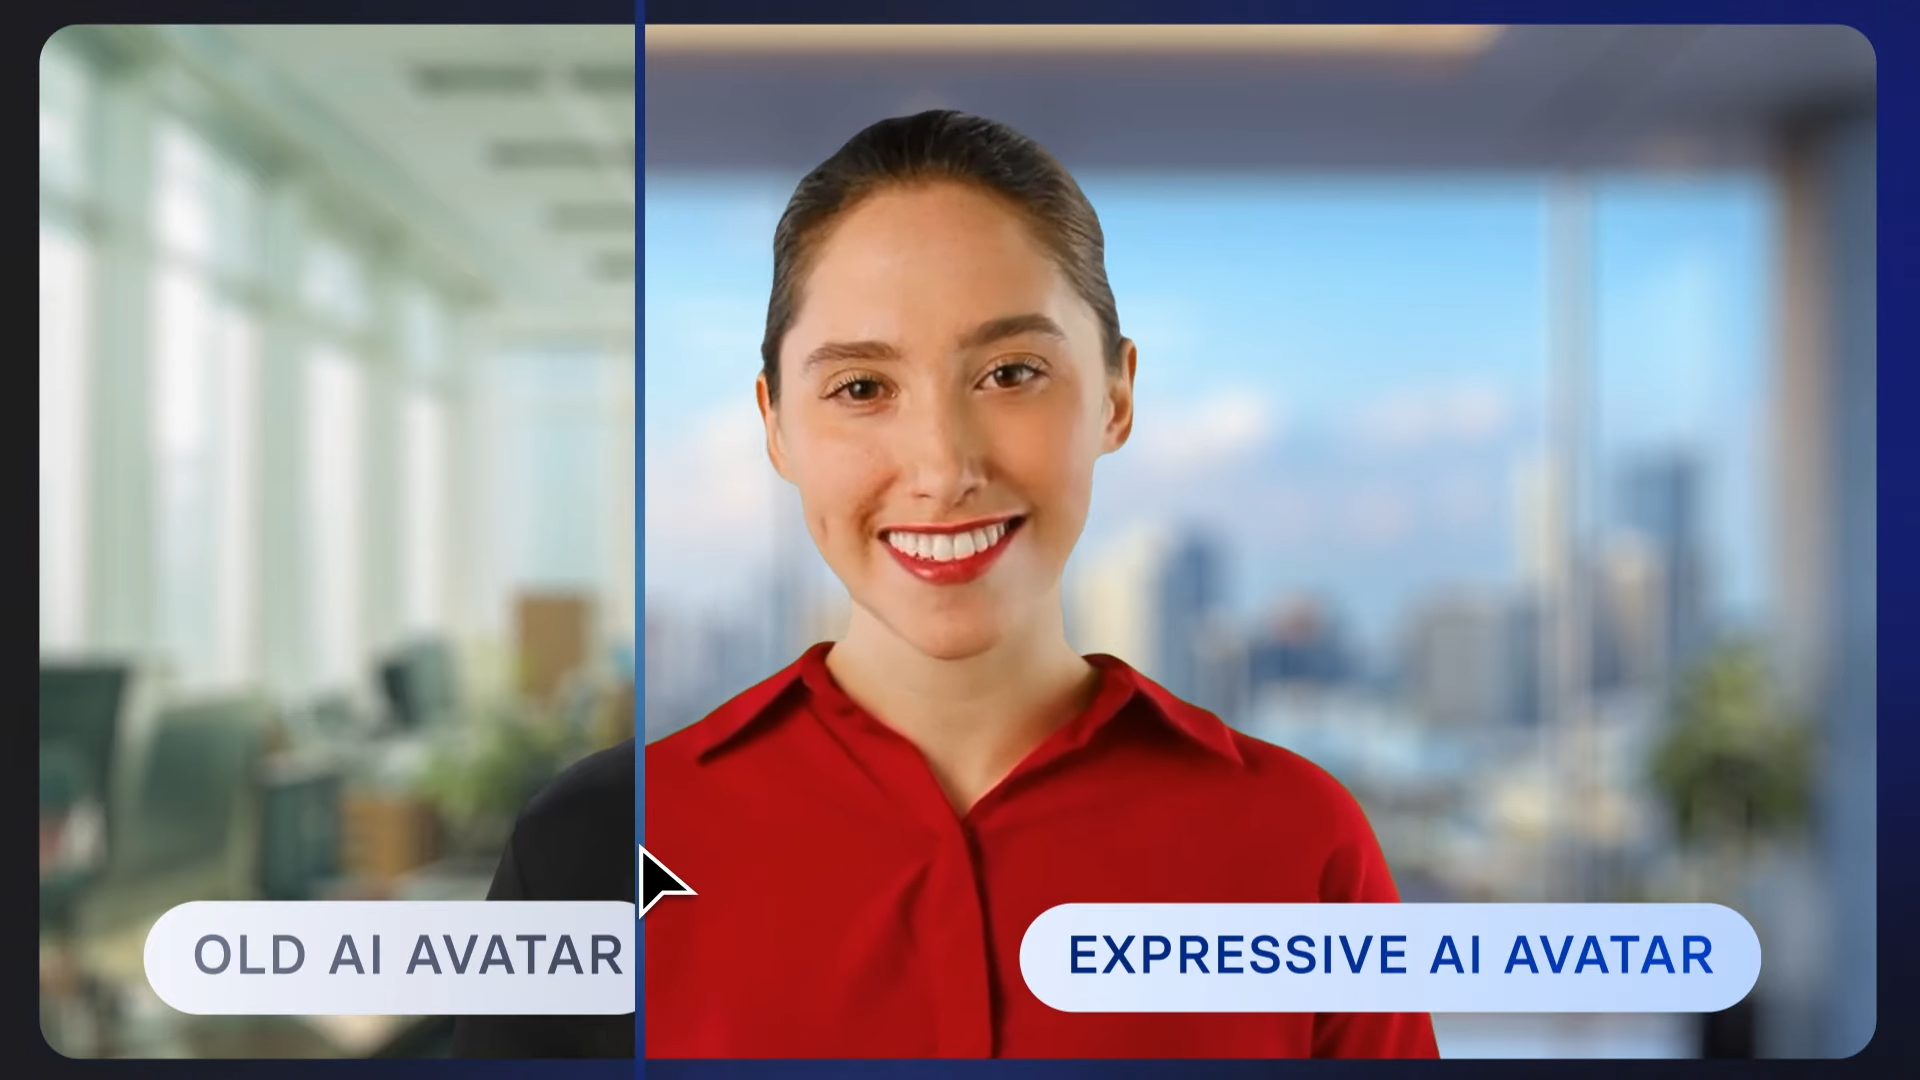 Video AI avatars get better at expressing emotions